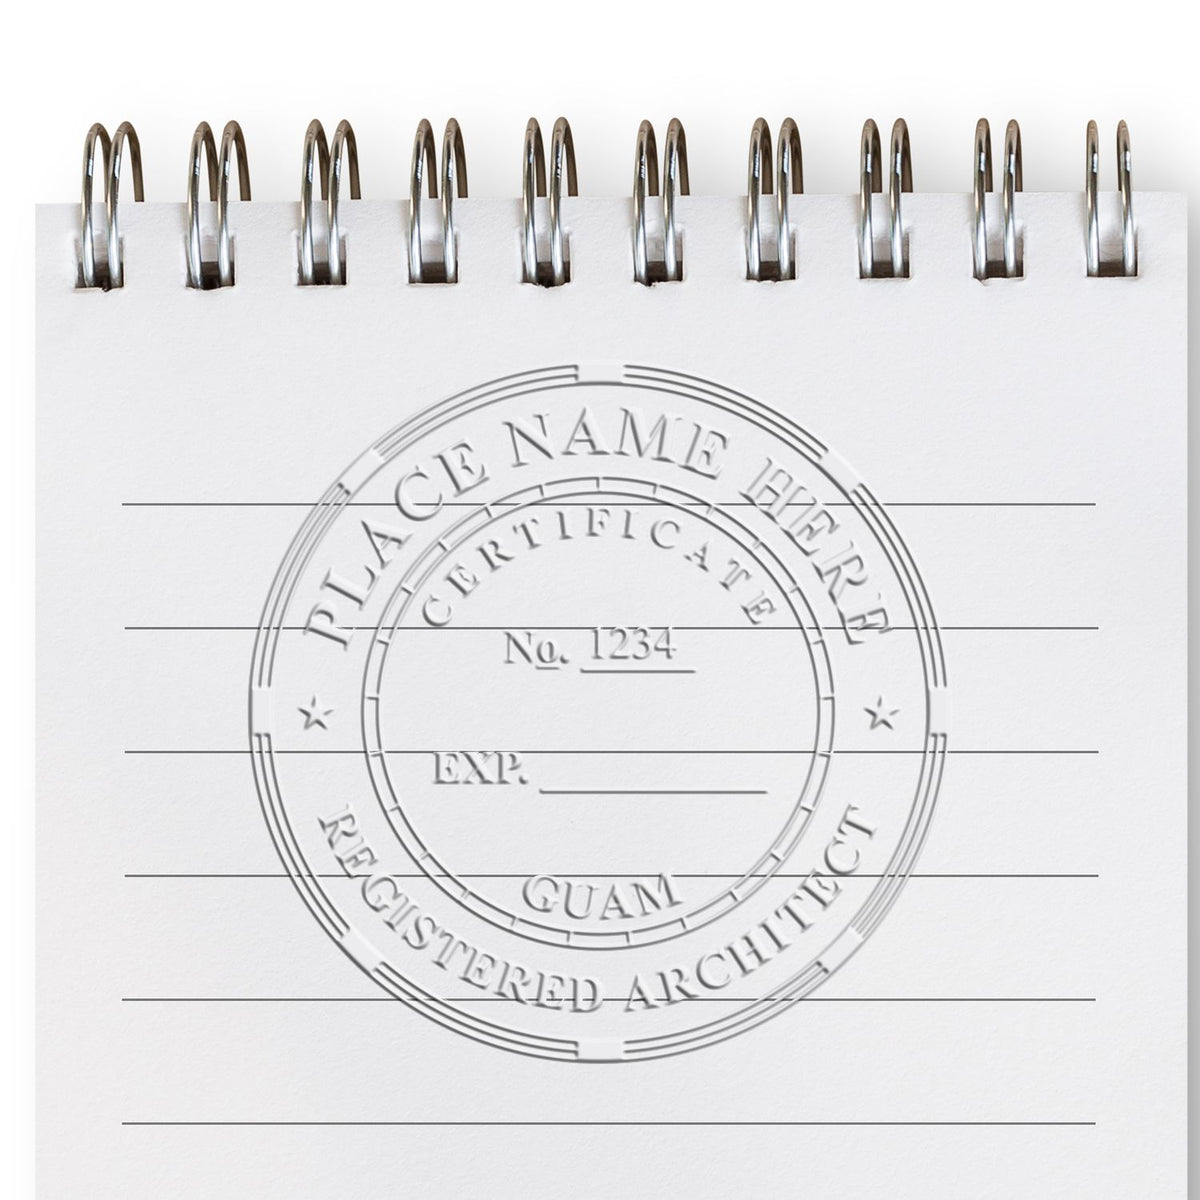 This paper is stamped with a sample imprint of the Handheld Guam Architect Seal Embosser, signifying its quality and reliability.